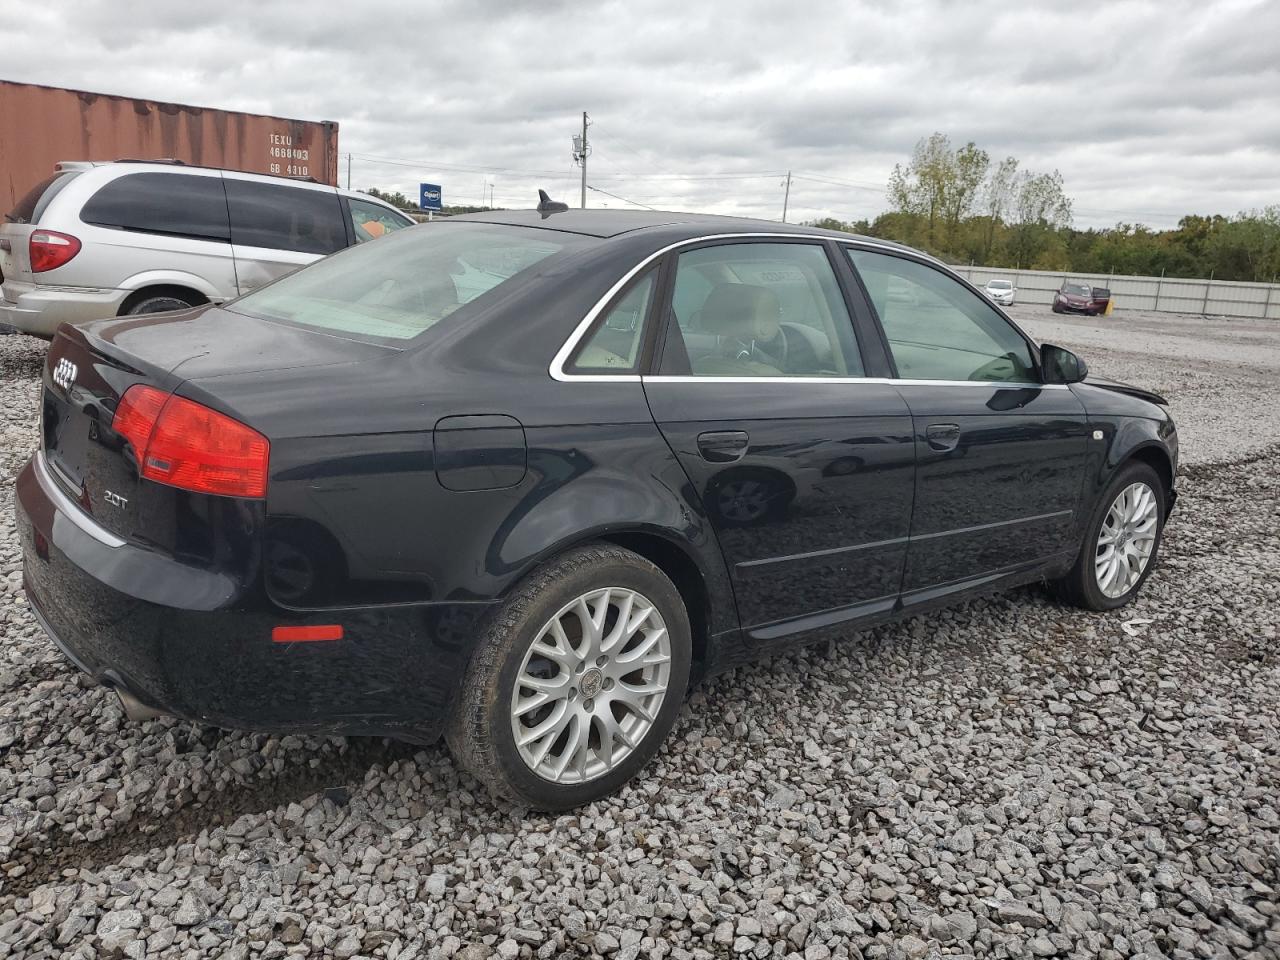 WAUAF78E48A****** Salvage and Repairable 2008 Audi A4 in AL - Hueytown